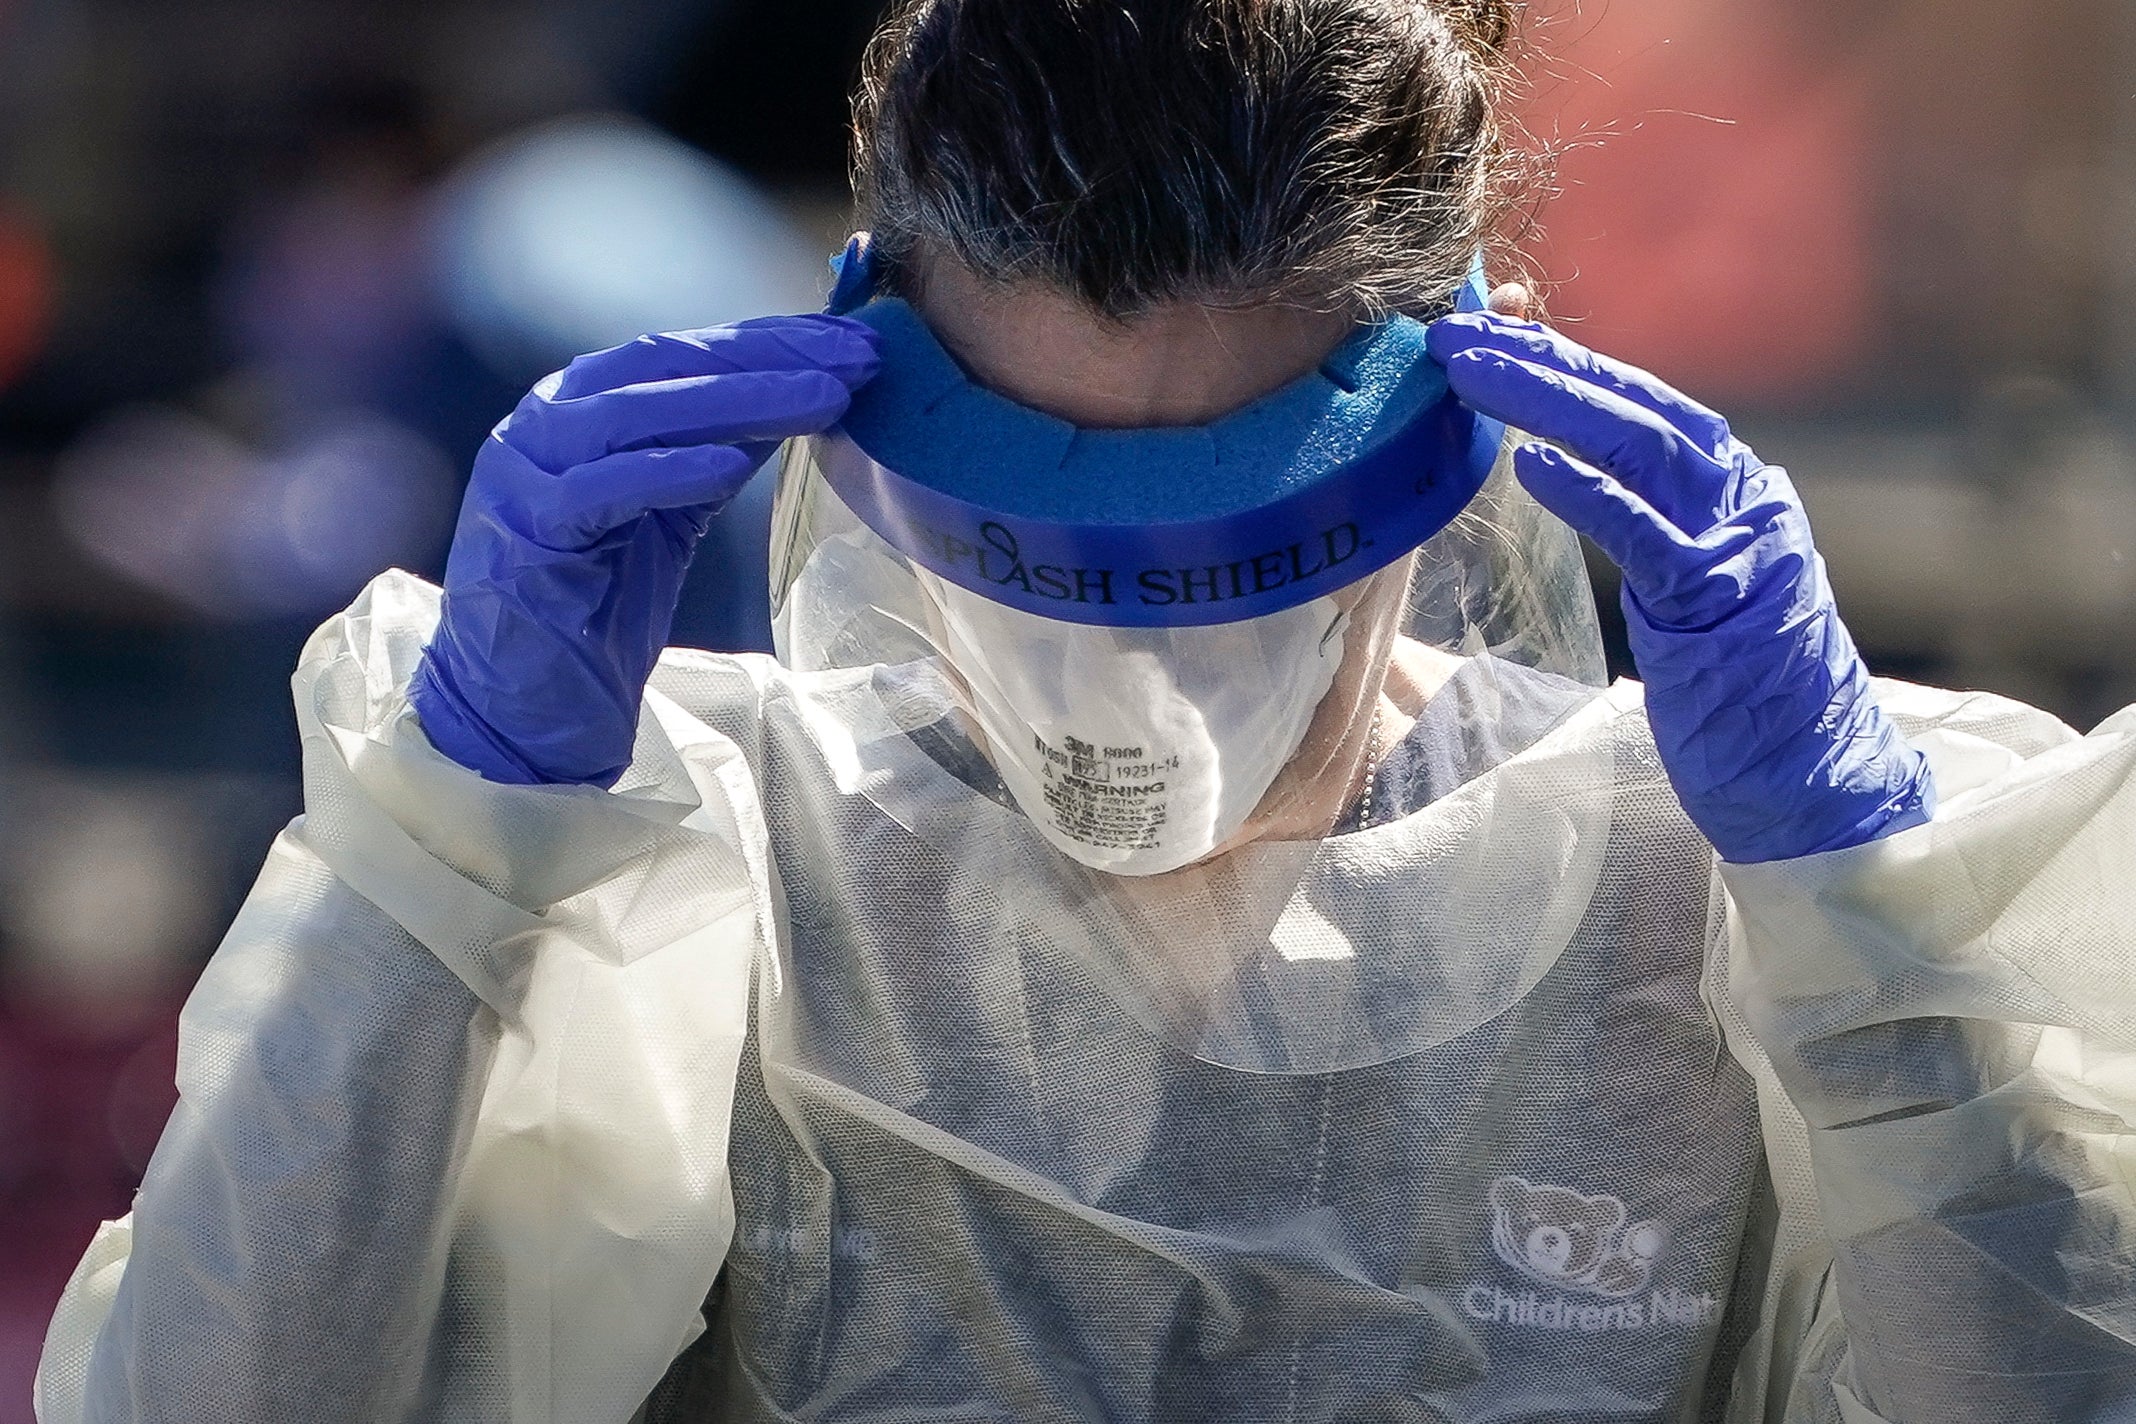 A medical professional from Children’s National Hospital works at a coronavirus drive-thru testing site for children age 22 and under at Trinity University on 2 April, 2020 in Washington, DC.